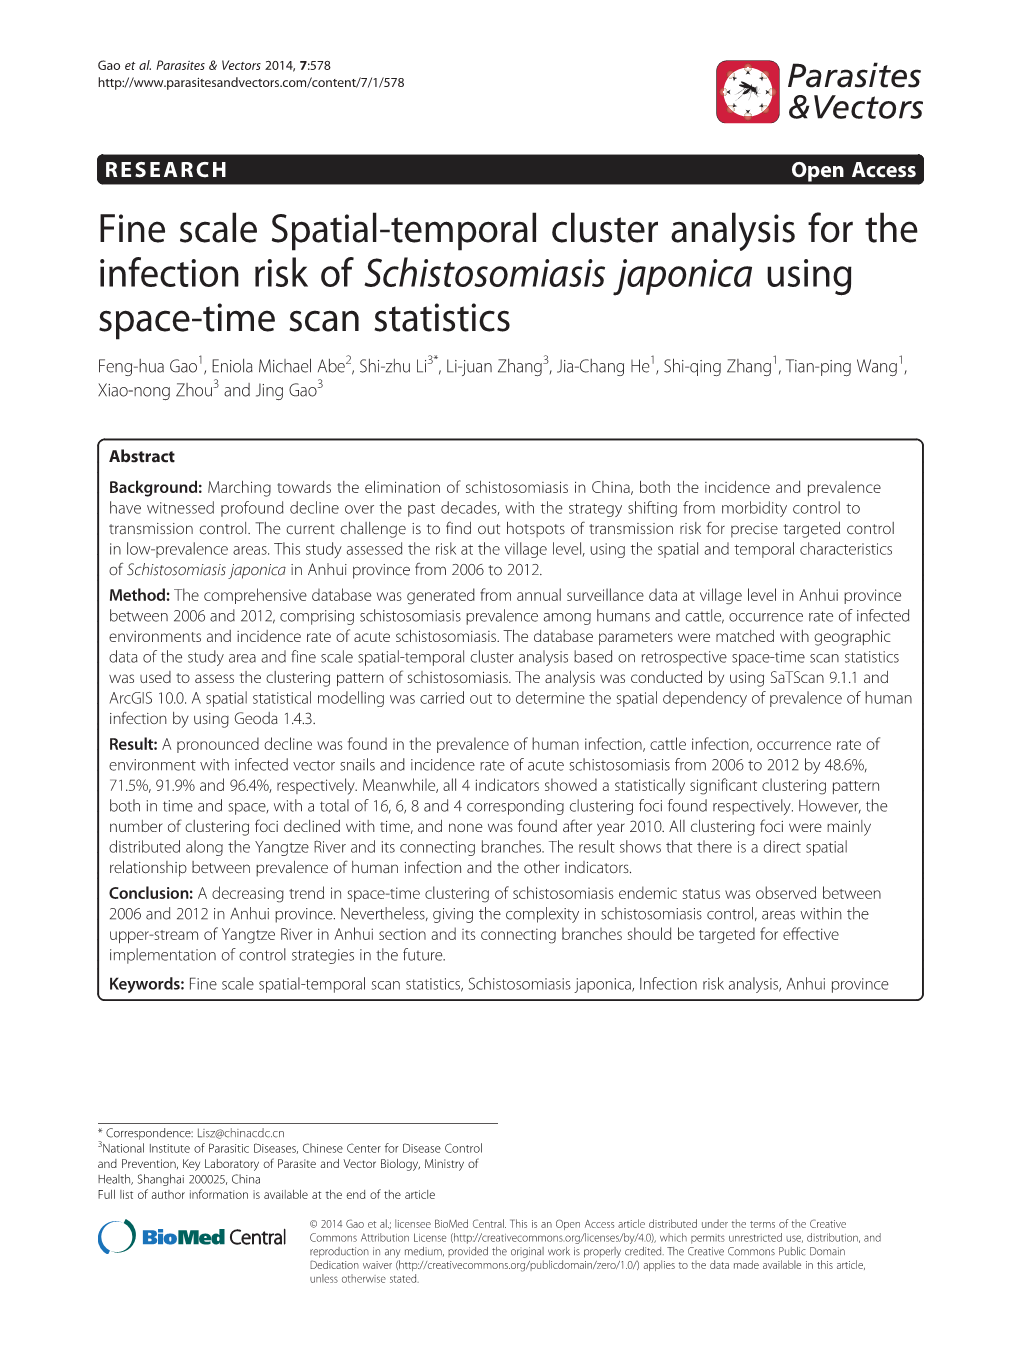 Fine Scale Spatial-Temporal Cluster Analysis for the Infection Risk Of